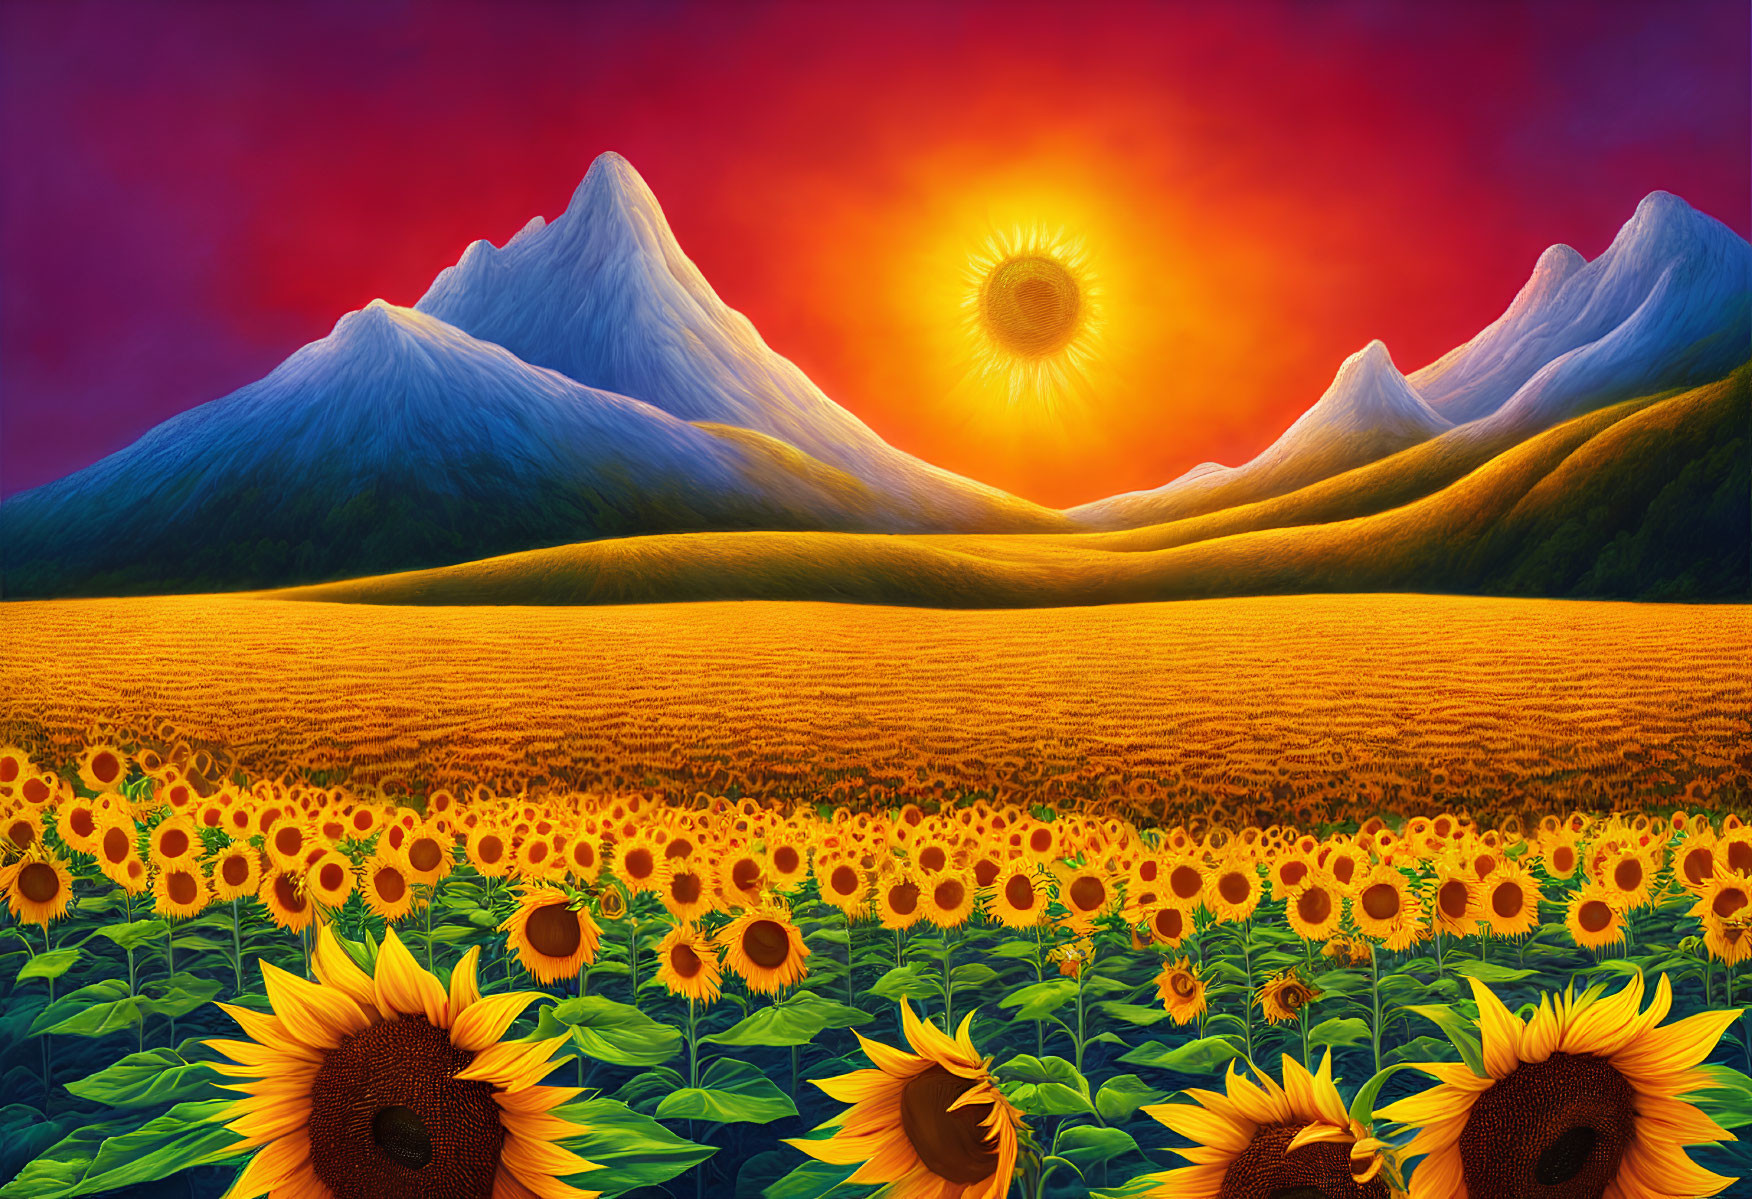 Colorful landscape with snow-capped mountains, sunflowers, and stylized sun eye.